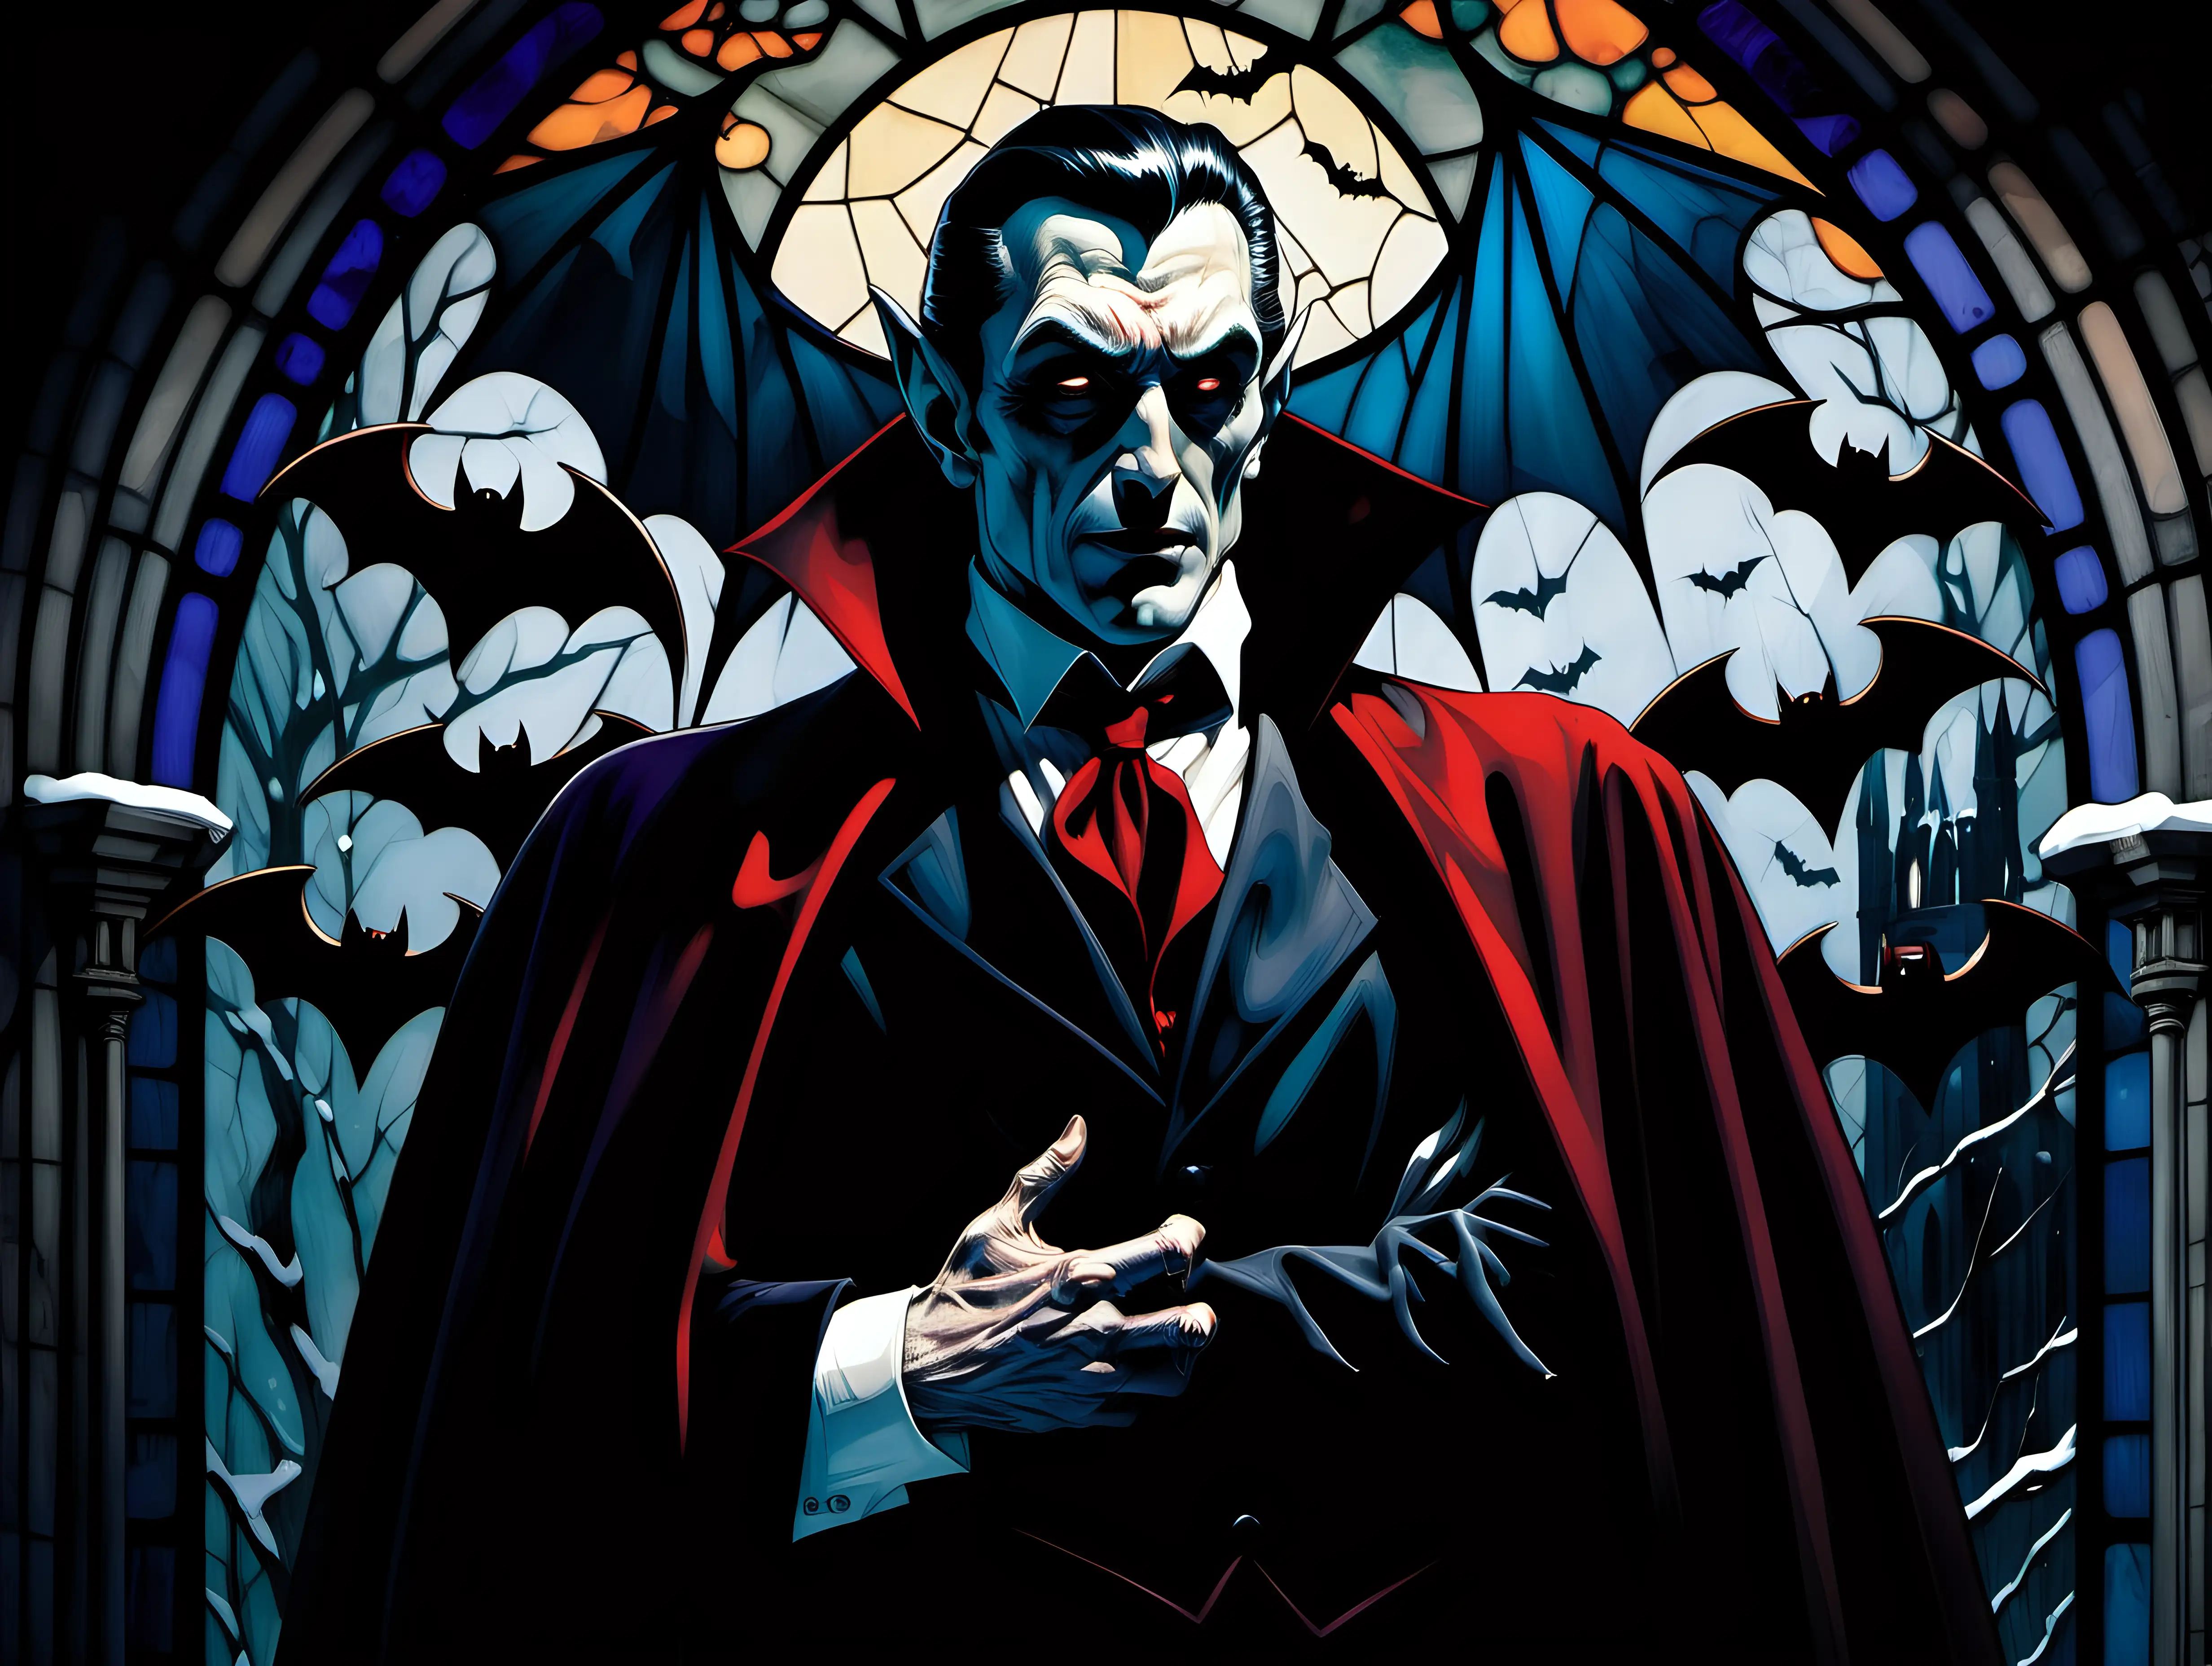 Dracula Pose by Stained Glass Window with Winter Vampire Bats